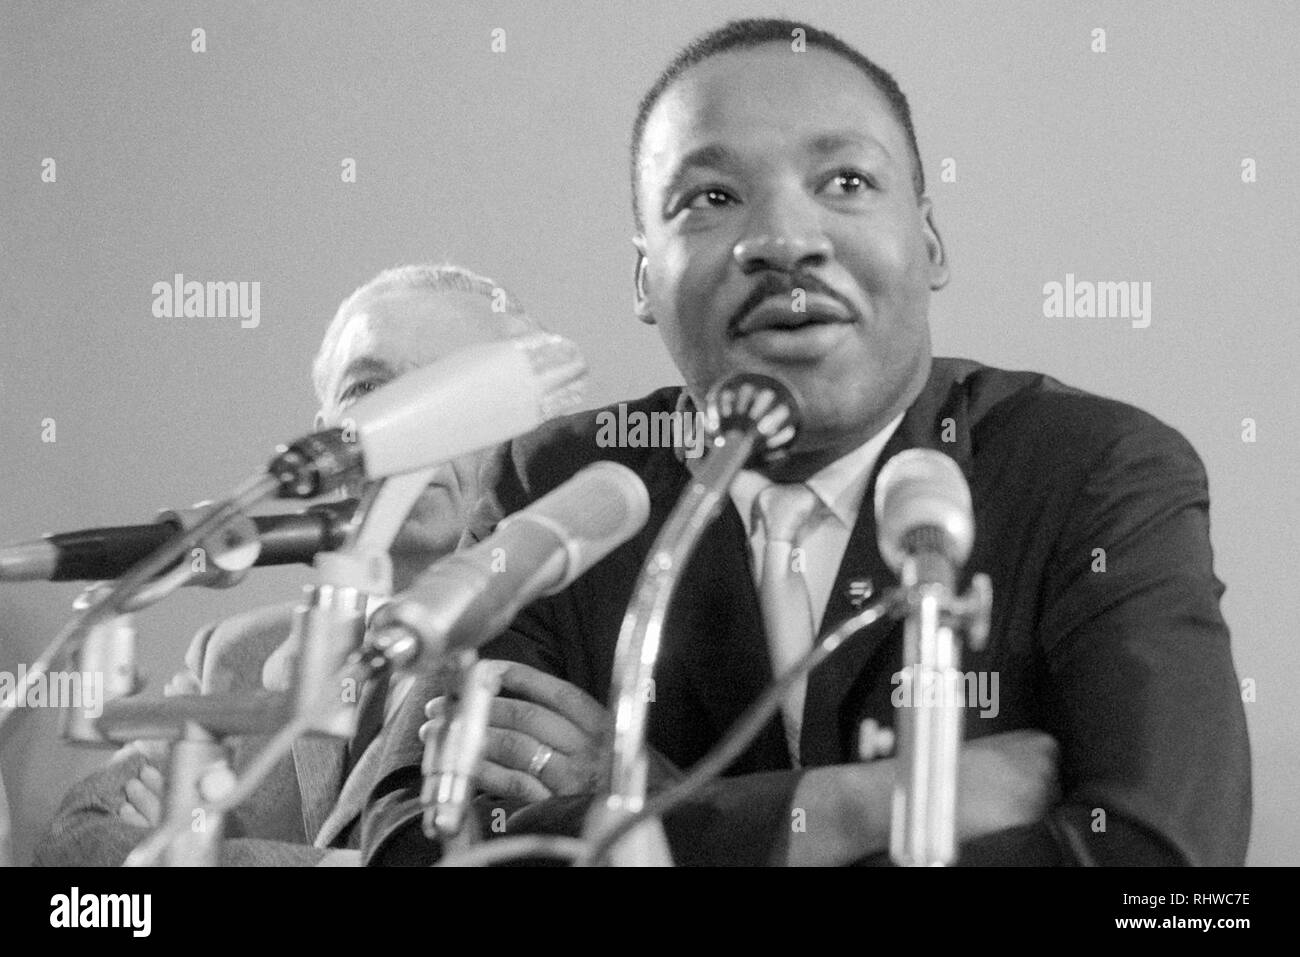 Martin Luther King, Jr. speaking during a press conference at Schiphol Airport in Amsterdam, Holland on August 15, 1964. Stock Photo